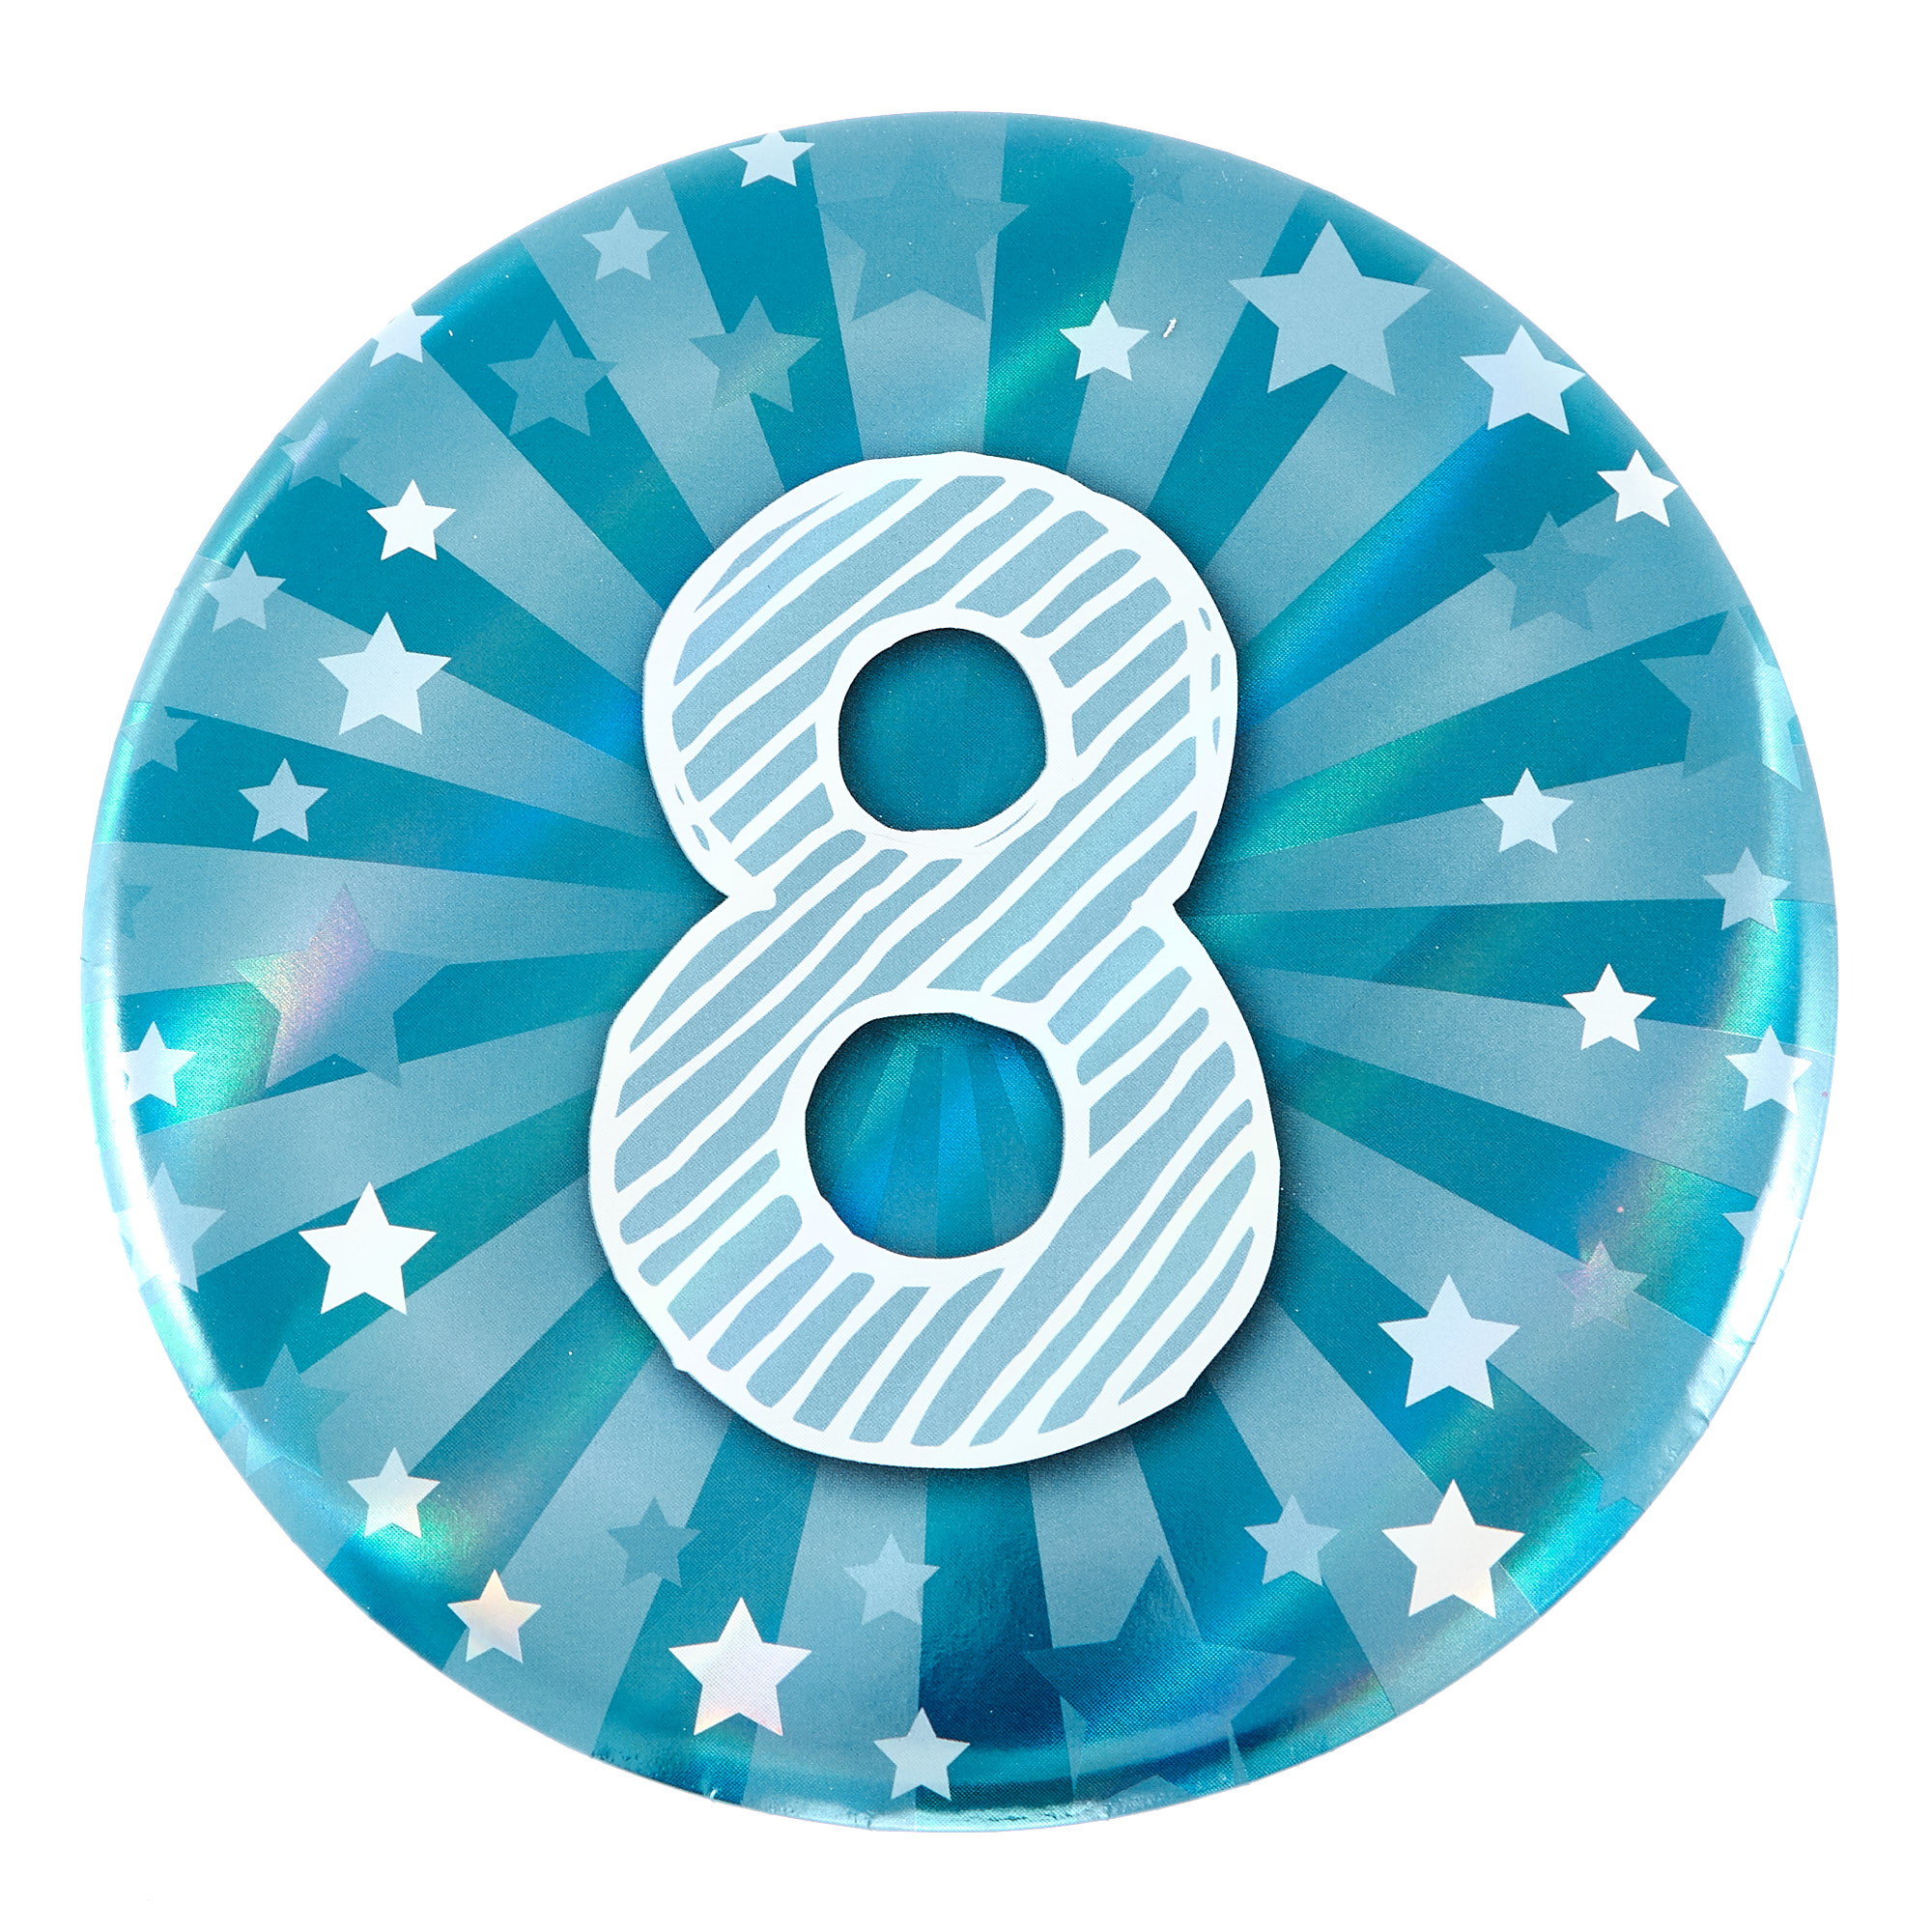 Buy Giant 8th Birthday Badge Blue For Gbp 0 99 Card Factory Uk